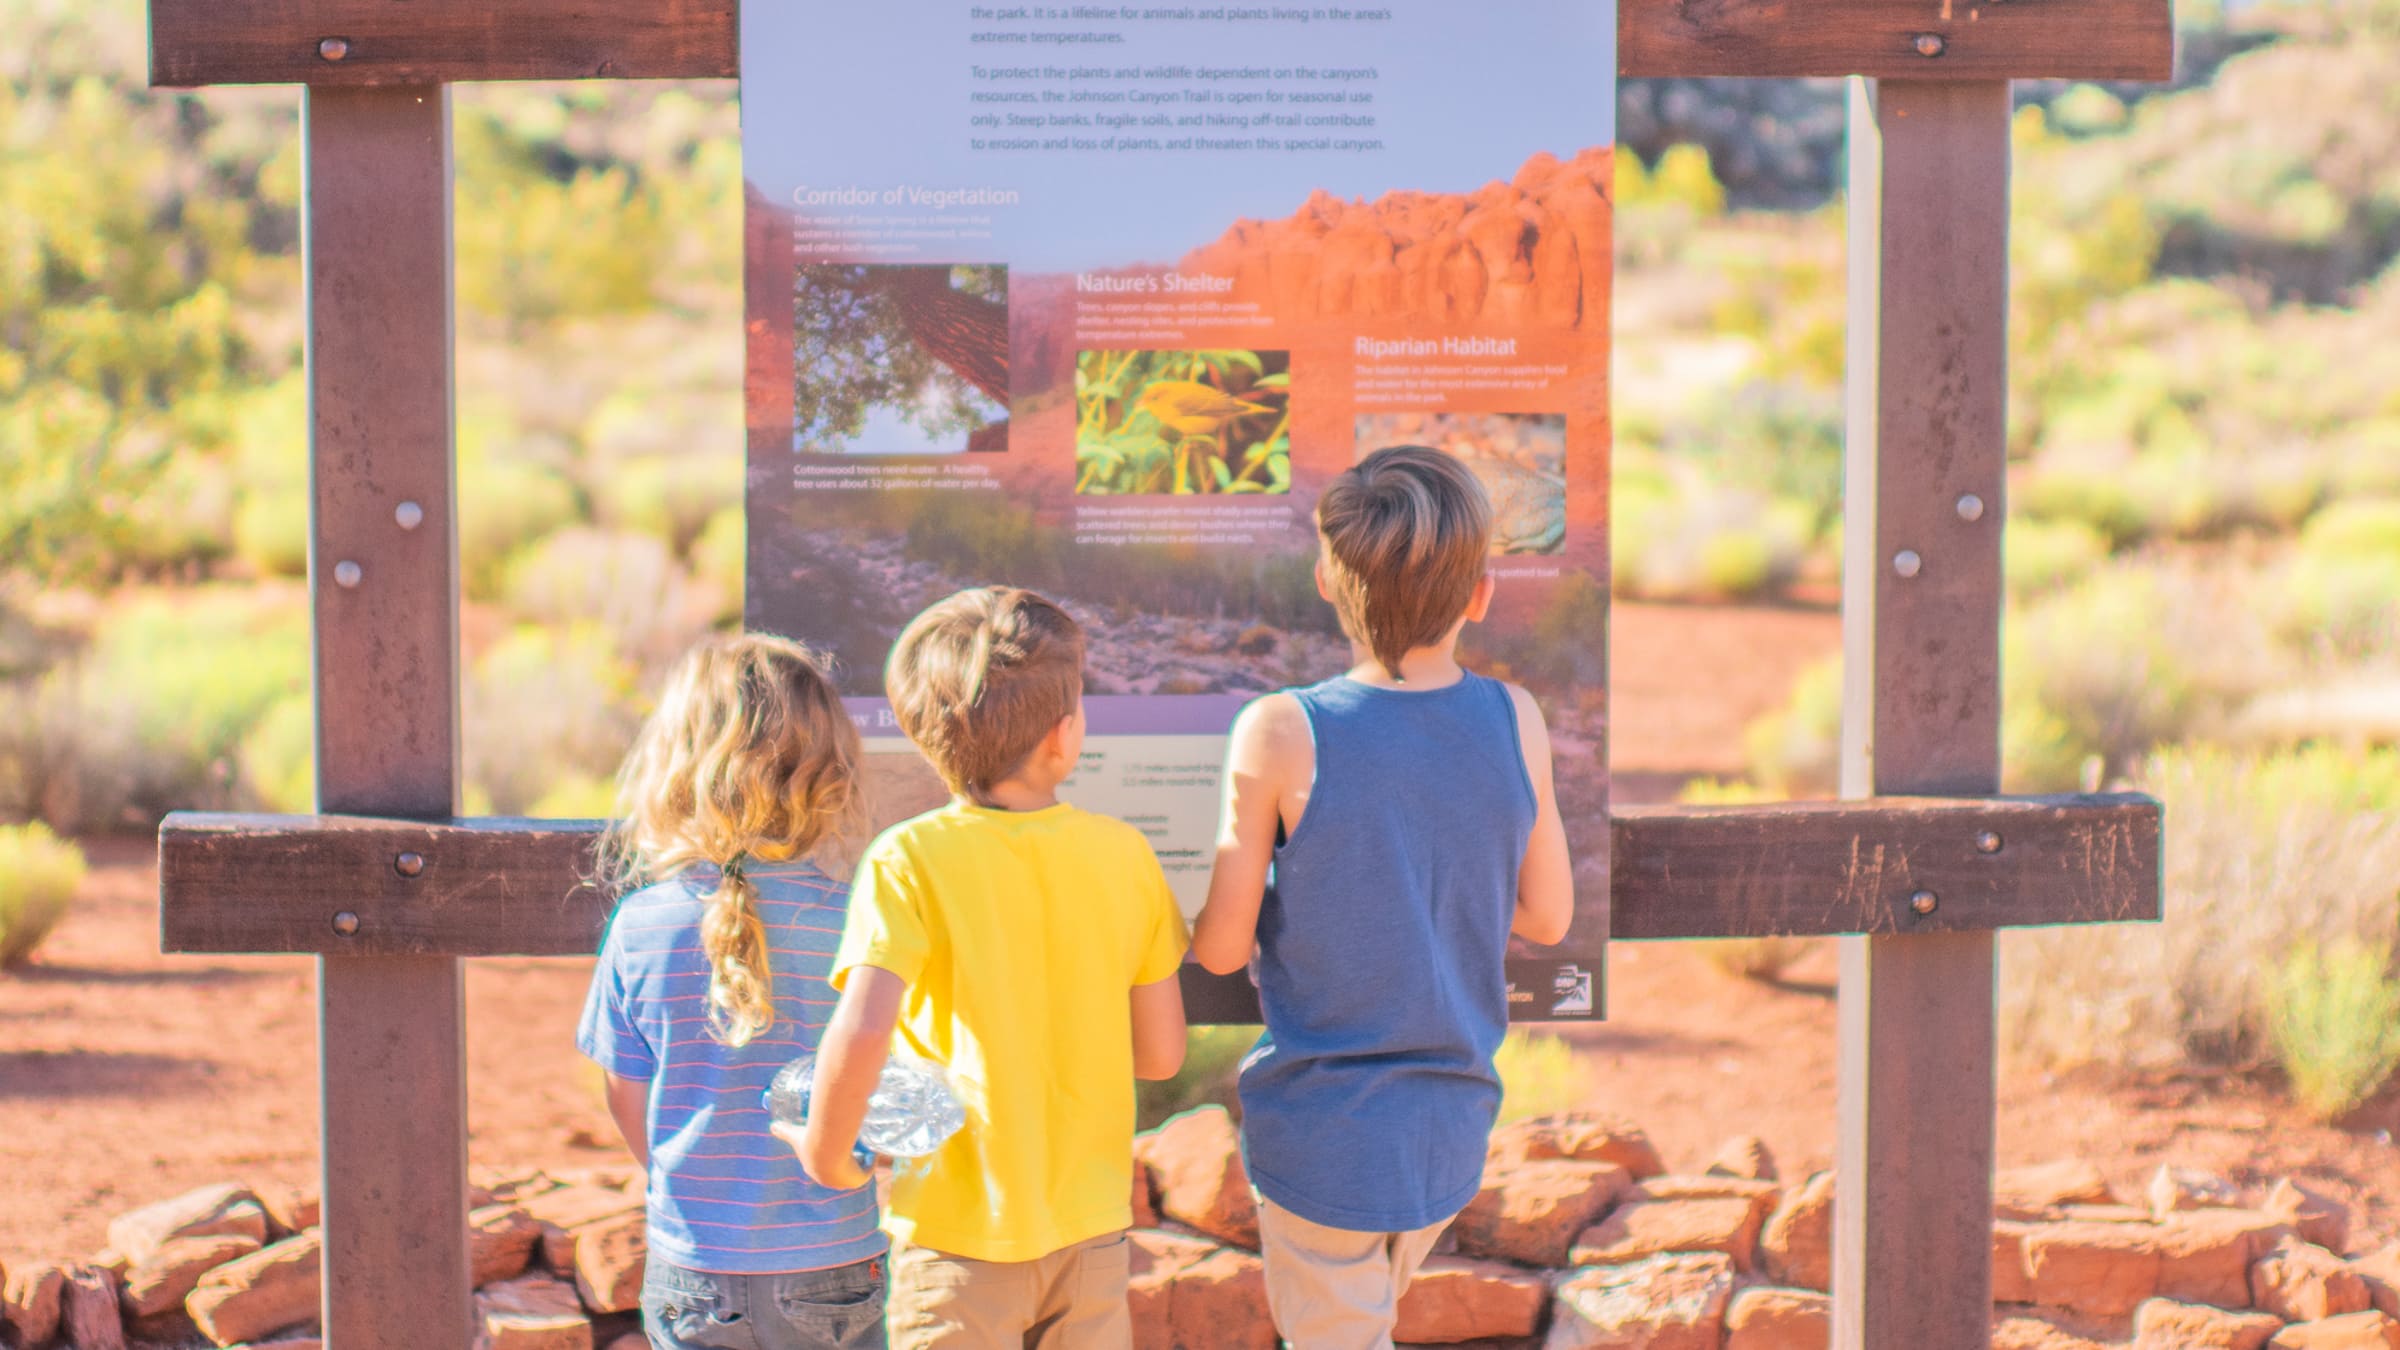 kids in desert looking confused about group fundraising